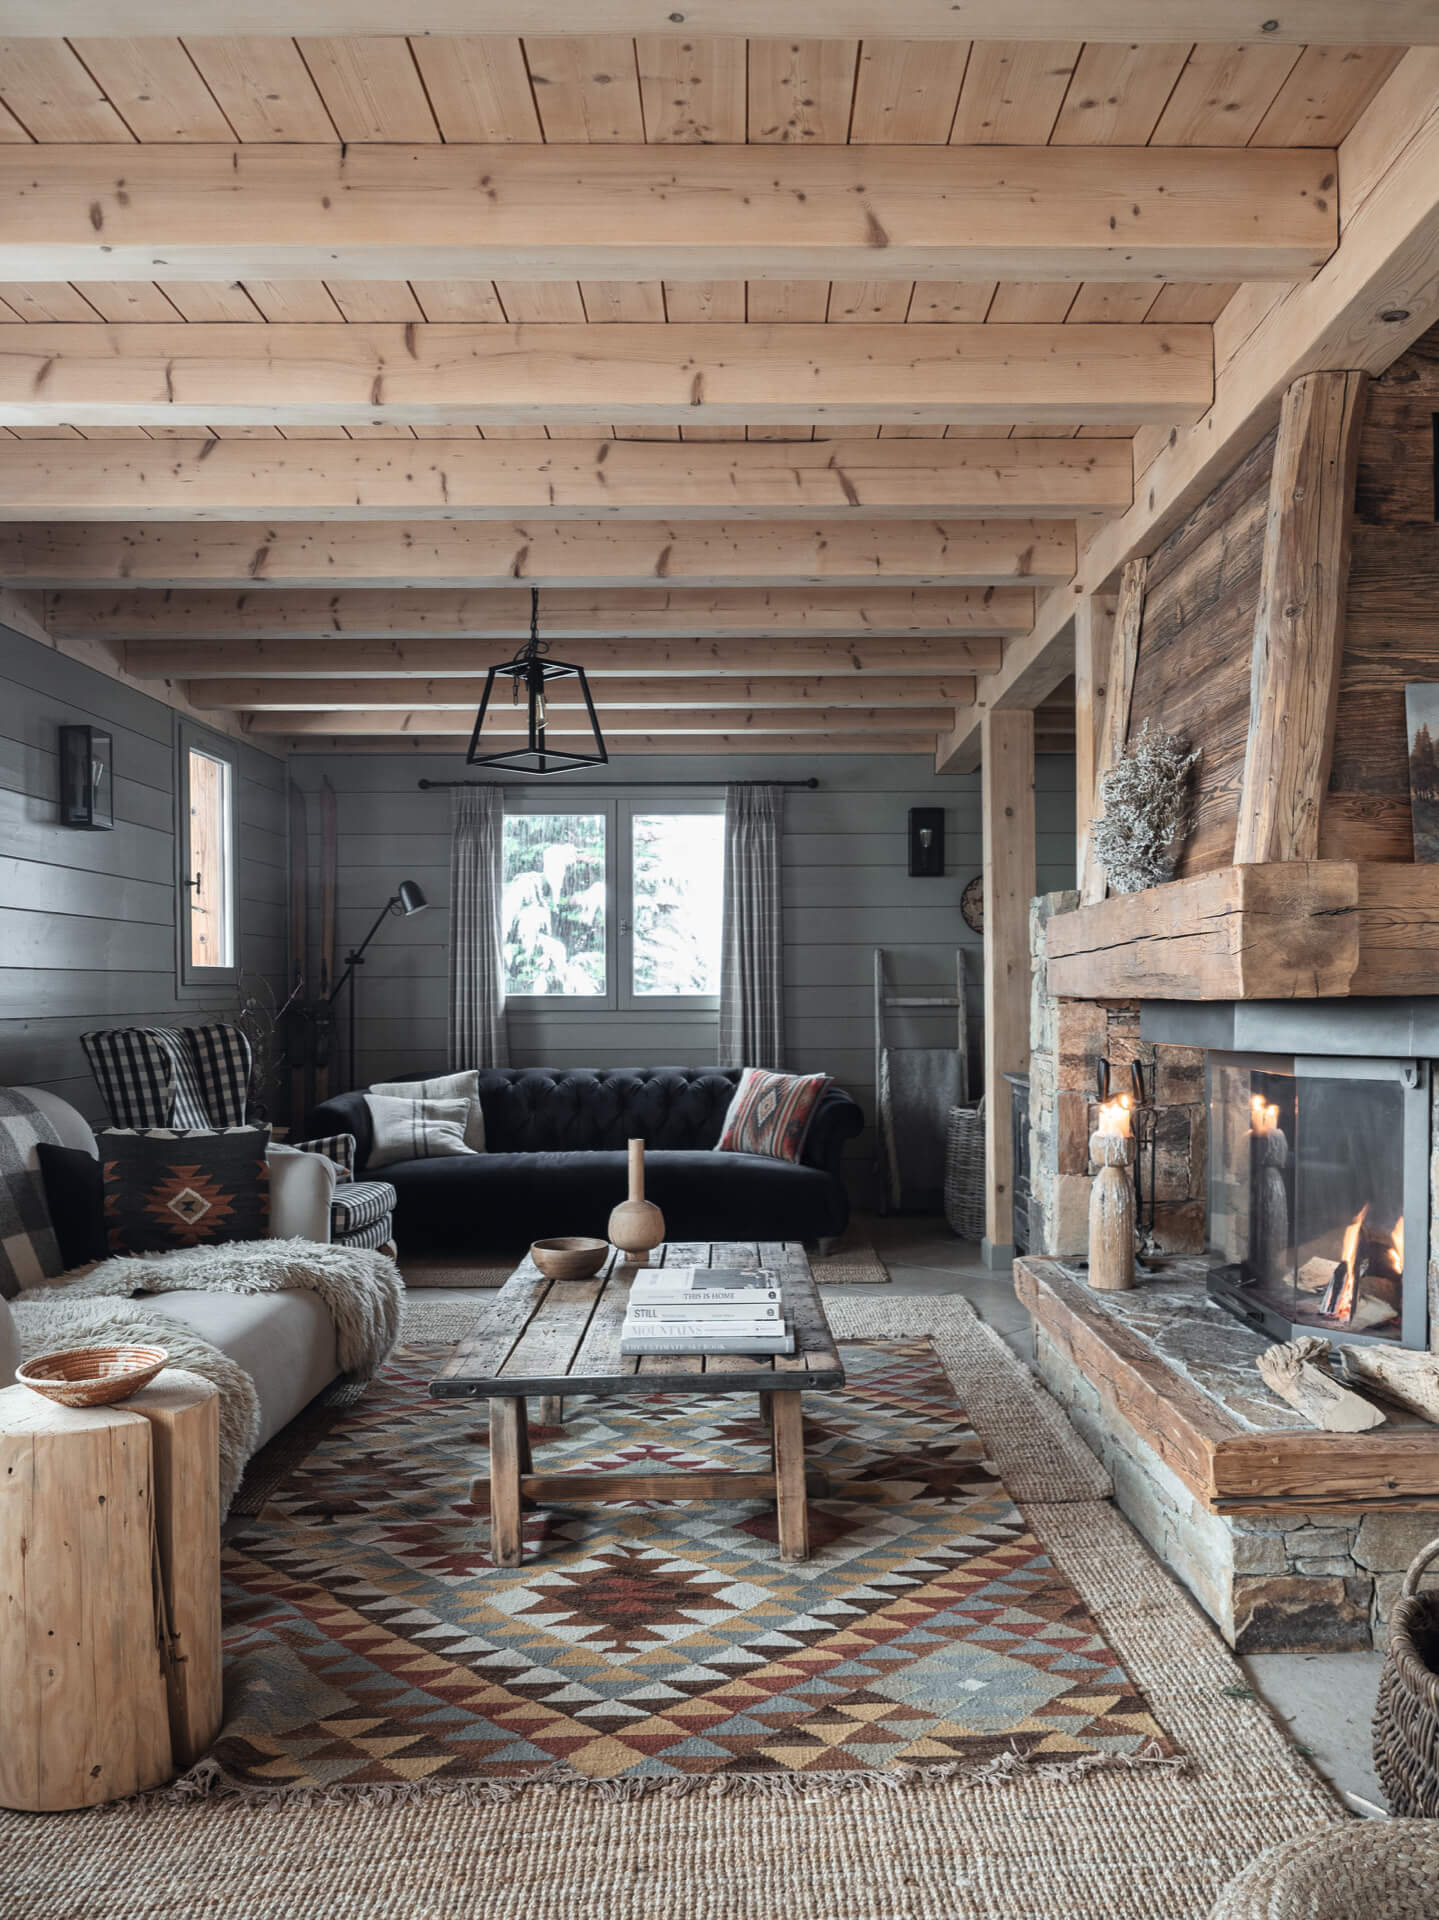 Cabin style interior featured in The Poetry of Spaces book by Sarah Andrews